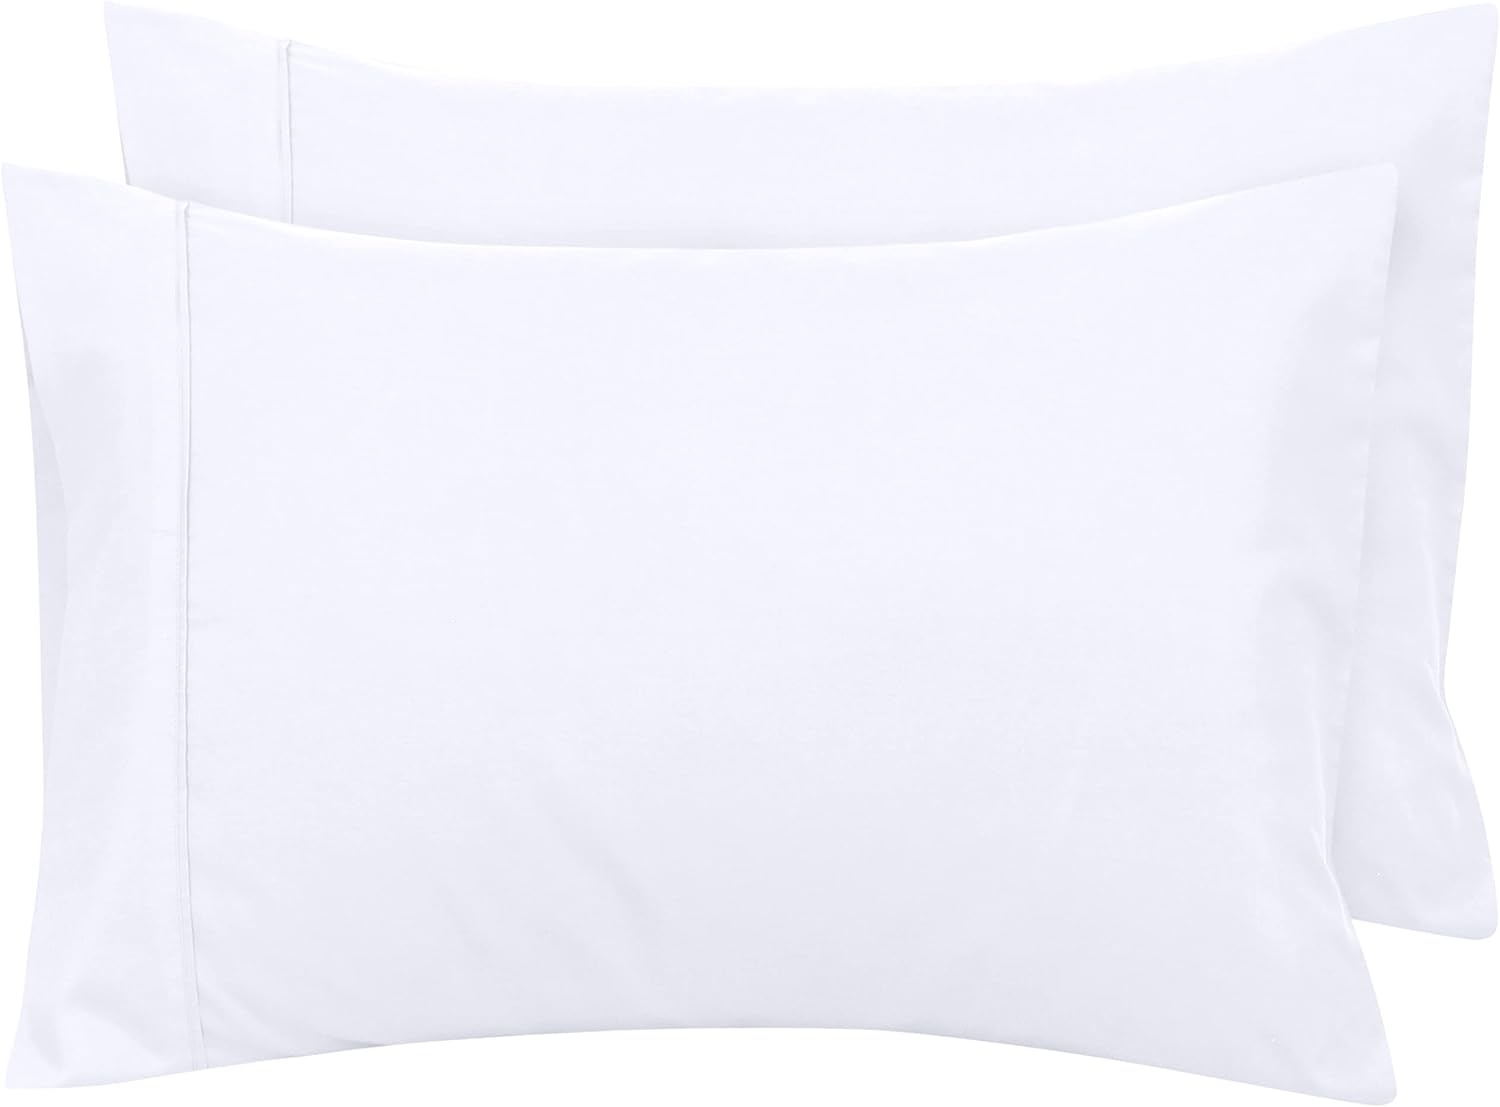 Royale Linens Queen Pillowcase Set of 2 - Bed Pillow Cover - 20" x 30" - White Pillowcases - 1800 Brushed Microfiber, Wrinkle & Fade Resistant - Soft & Cozy- Queen Size Pillow Case (Queen, White)